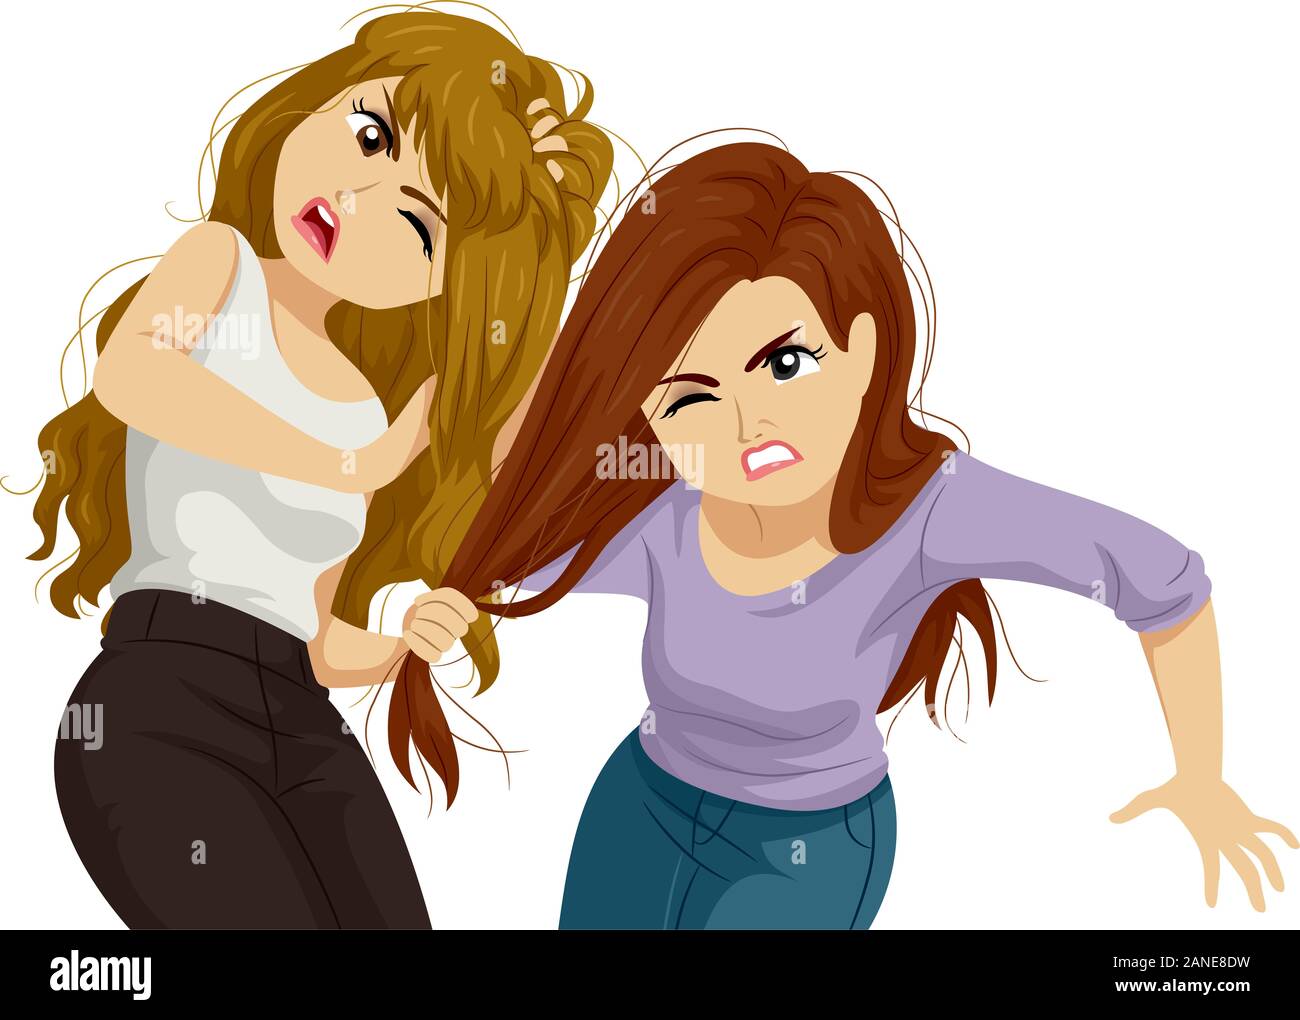 Illustration of Two Teenage Girls Fighting and Pulling Hair of Each Other  Stock Photo - Alamy